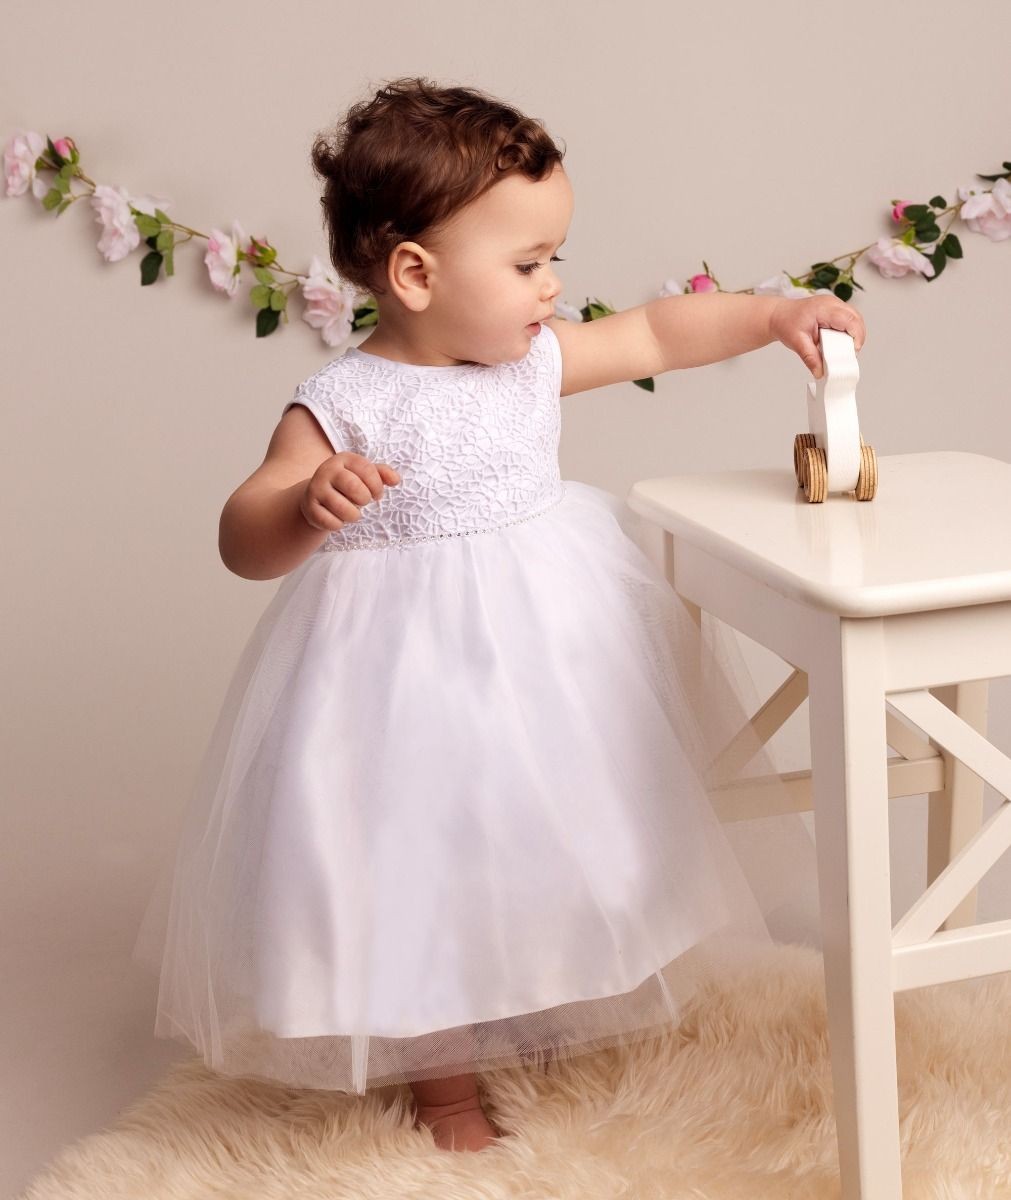 Baby Girls Christening Dress with Lace & Bow - ROSE - White